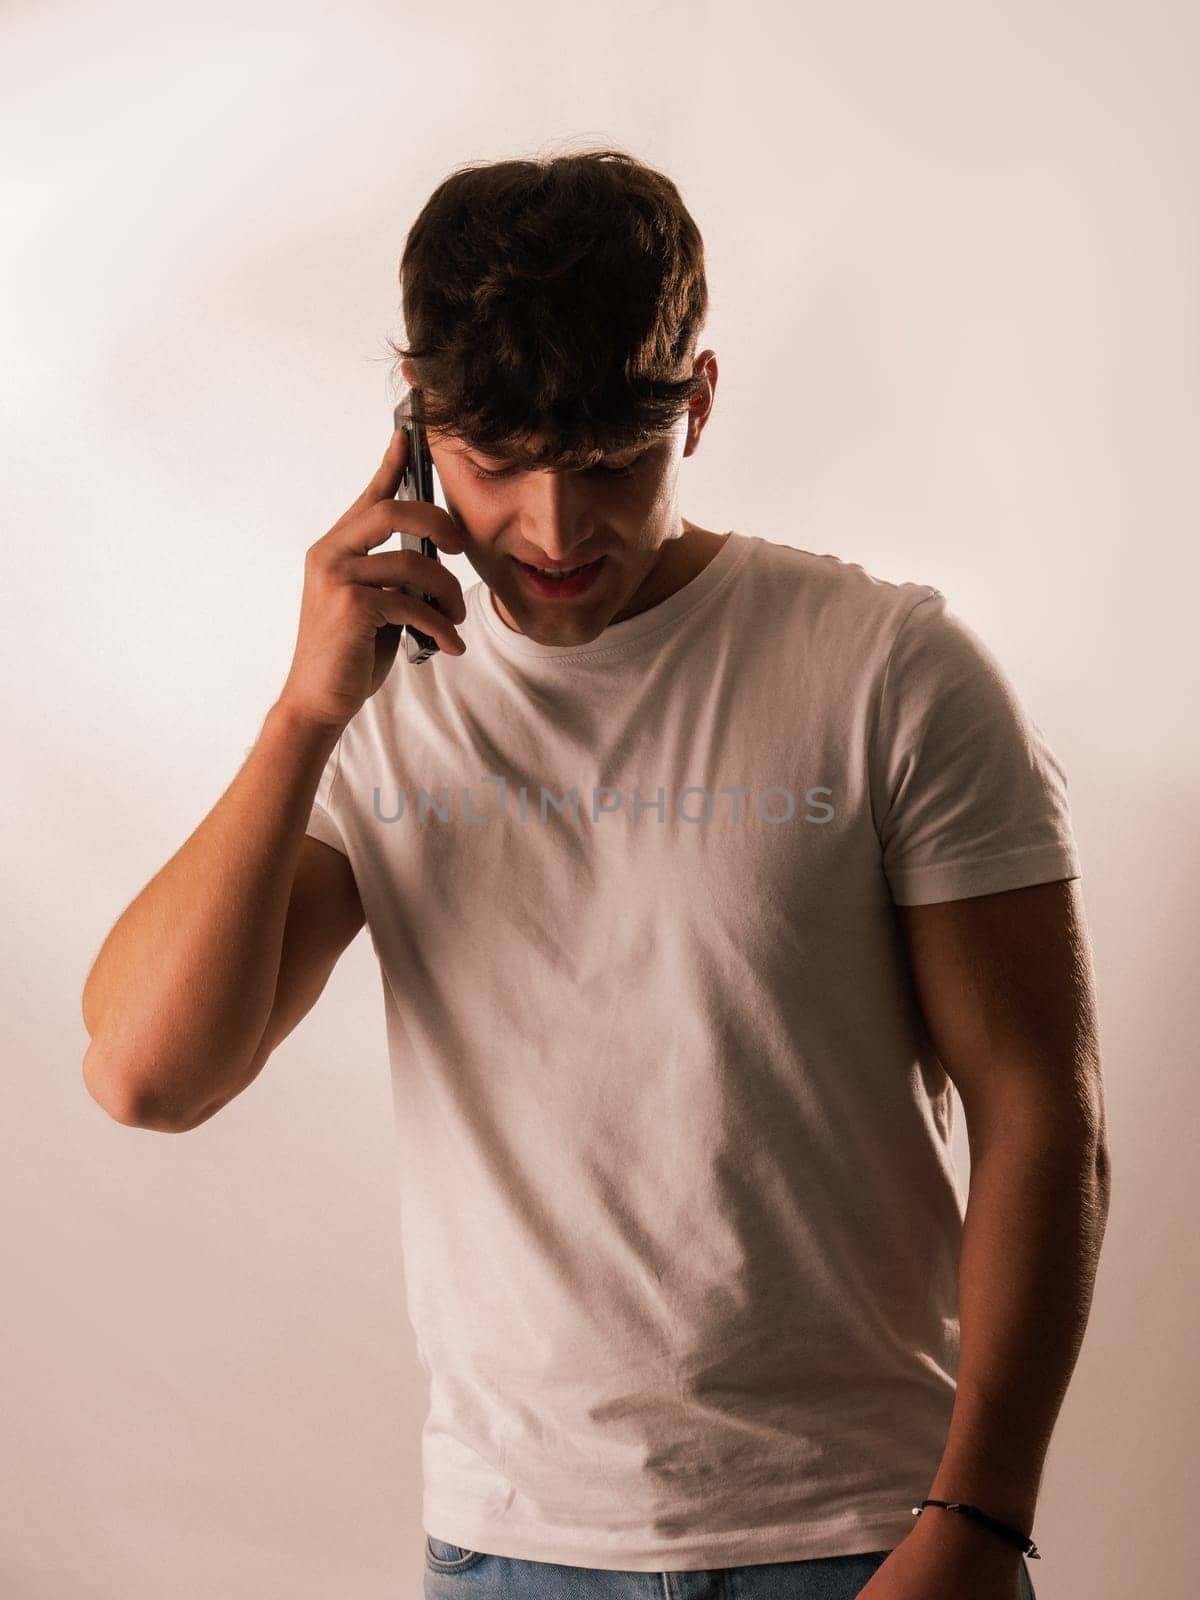 Handsome Young Man in a White Shirt Engaged in a Phone Conversation by artofphoto